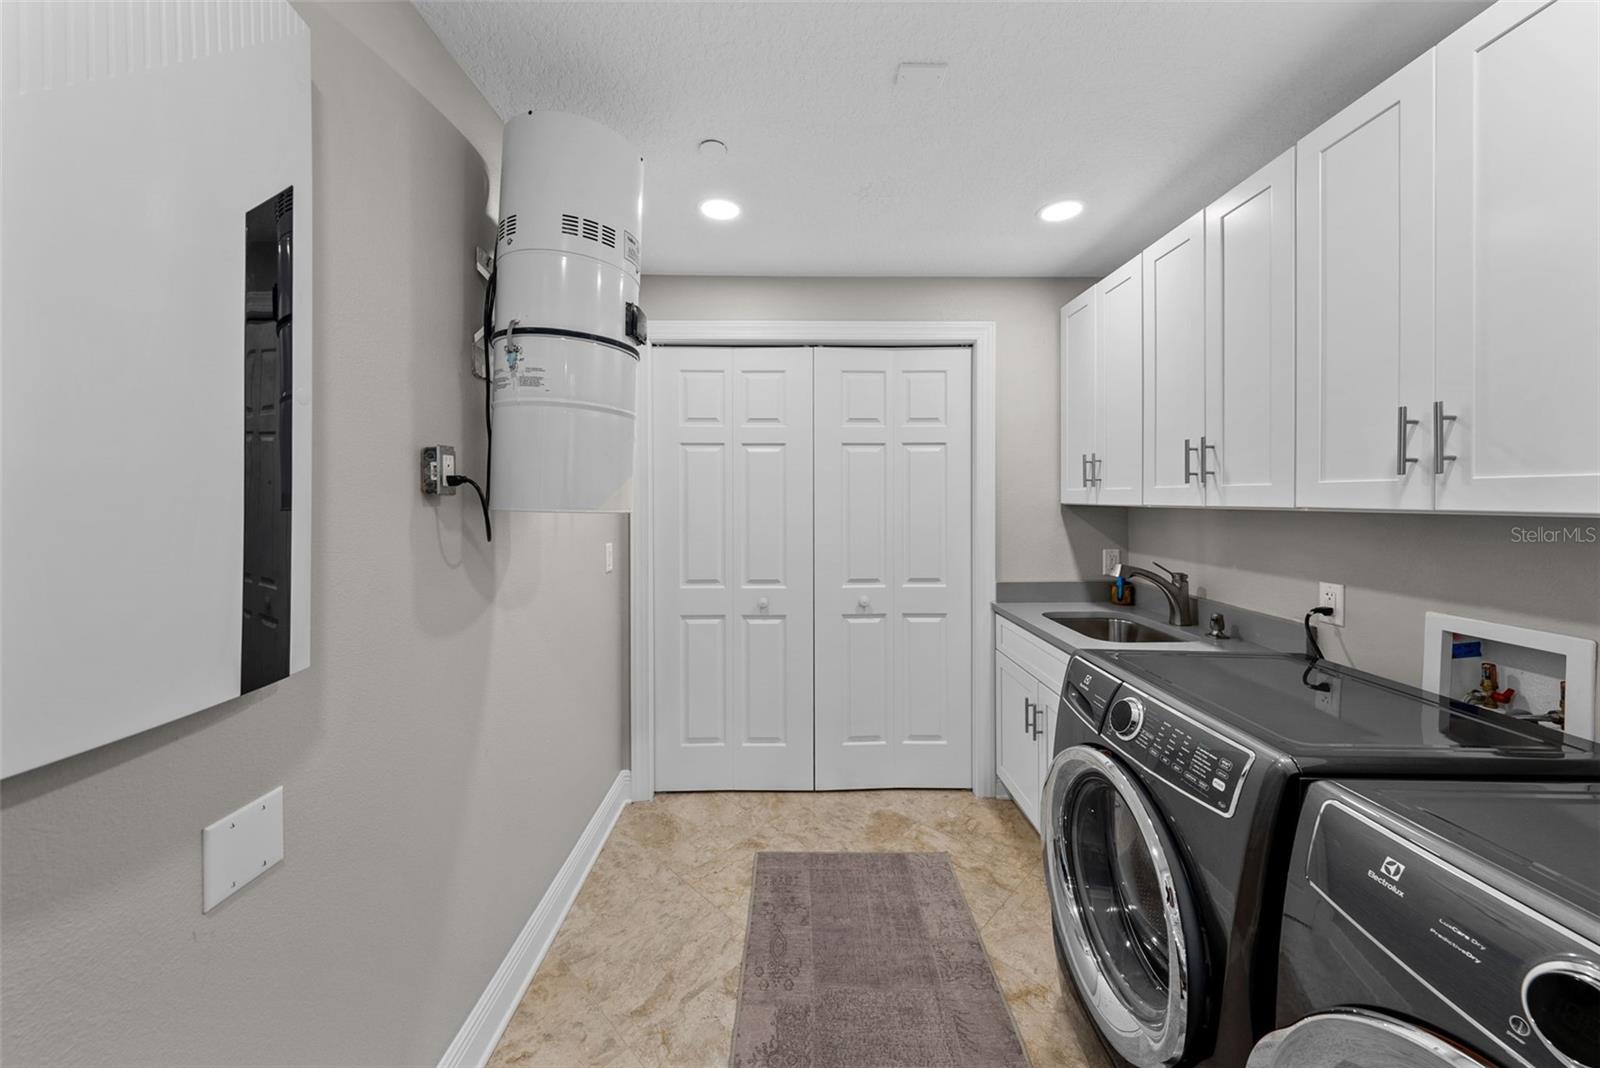 LAUNDRY ROOM OFF OF KITCHEN